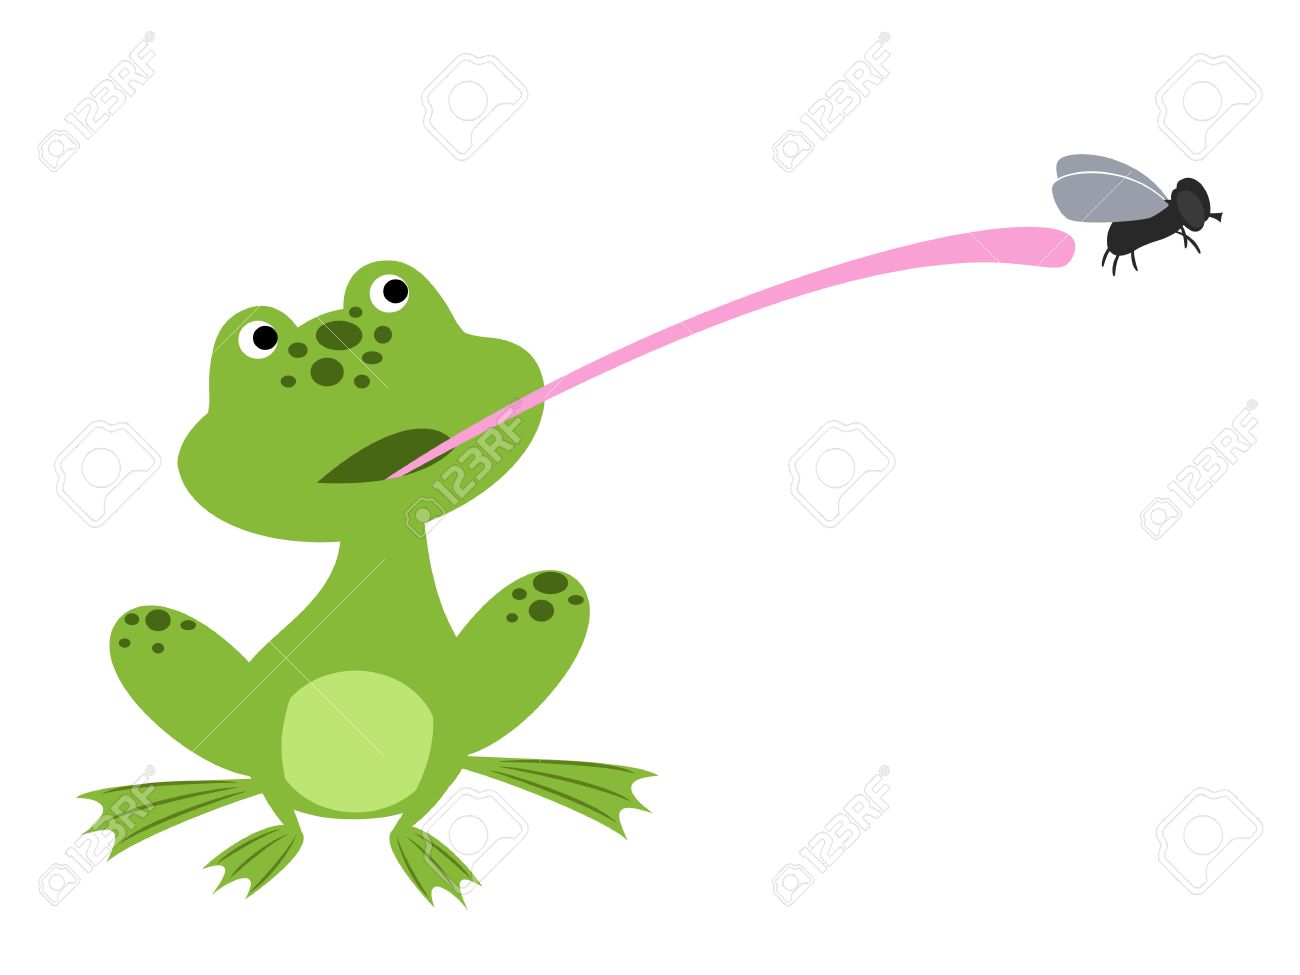 Free Frog Clipart tongue, Download Free Clip Art on Owips